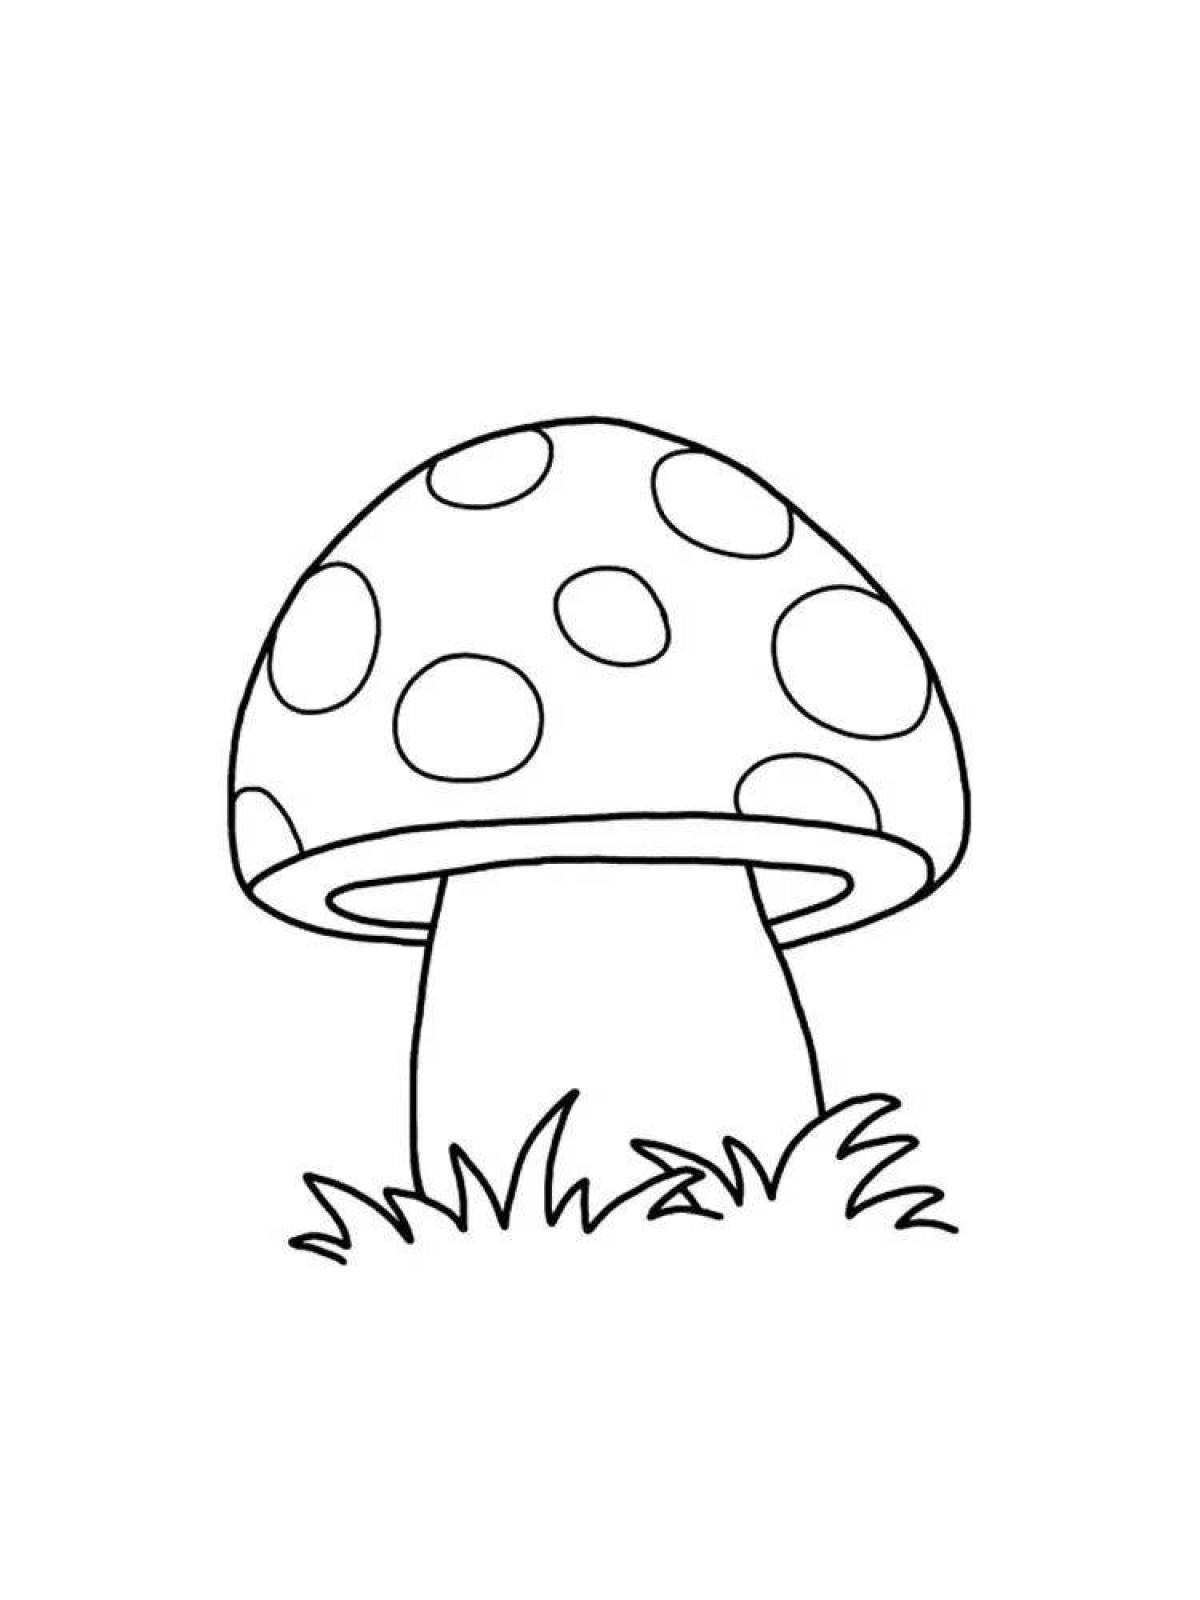 Coloring book refined fly agaric